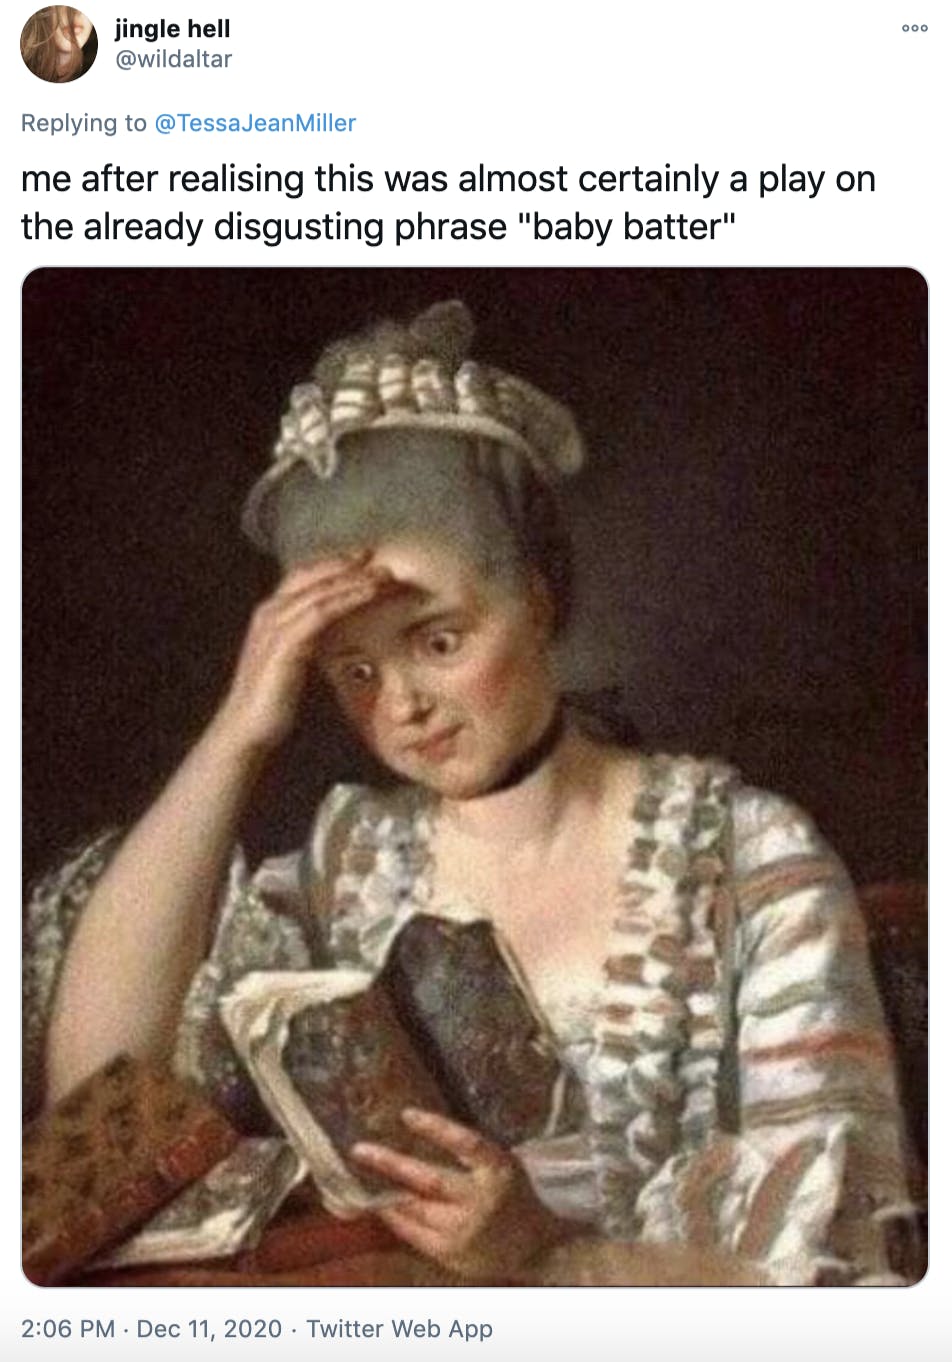 'me after realising this was almost certainly a play on the already disgusting phrase 'baby batter' painting of a 18th century noble woman reading a book with a horrified expression